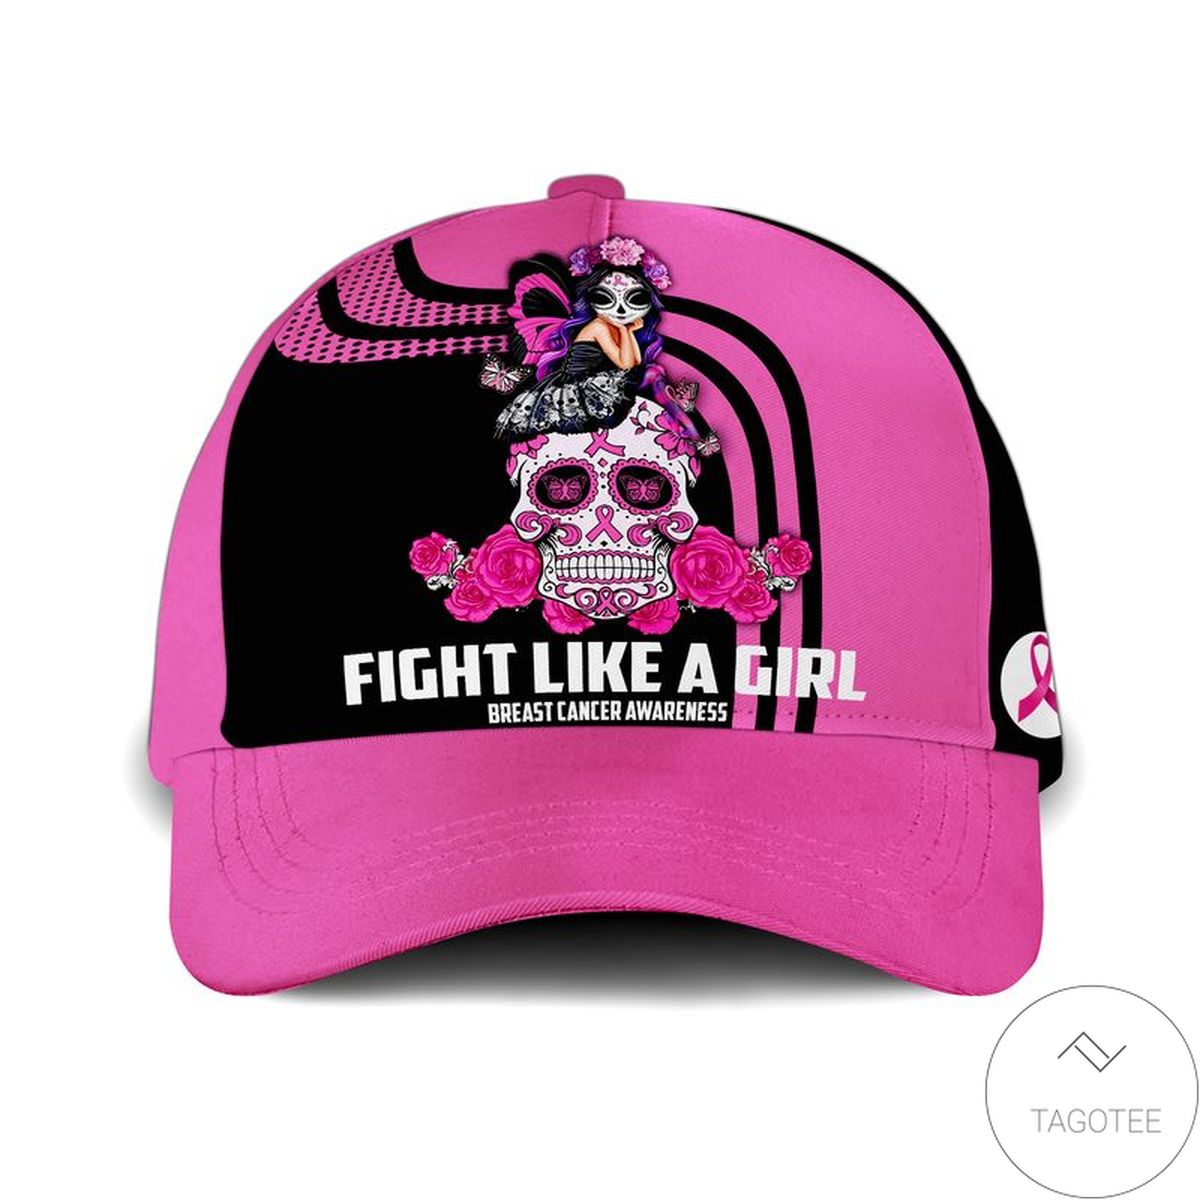 Breast Cancer Awareness - Fight Like A Girl Cap